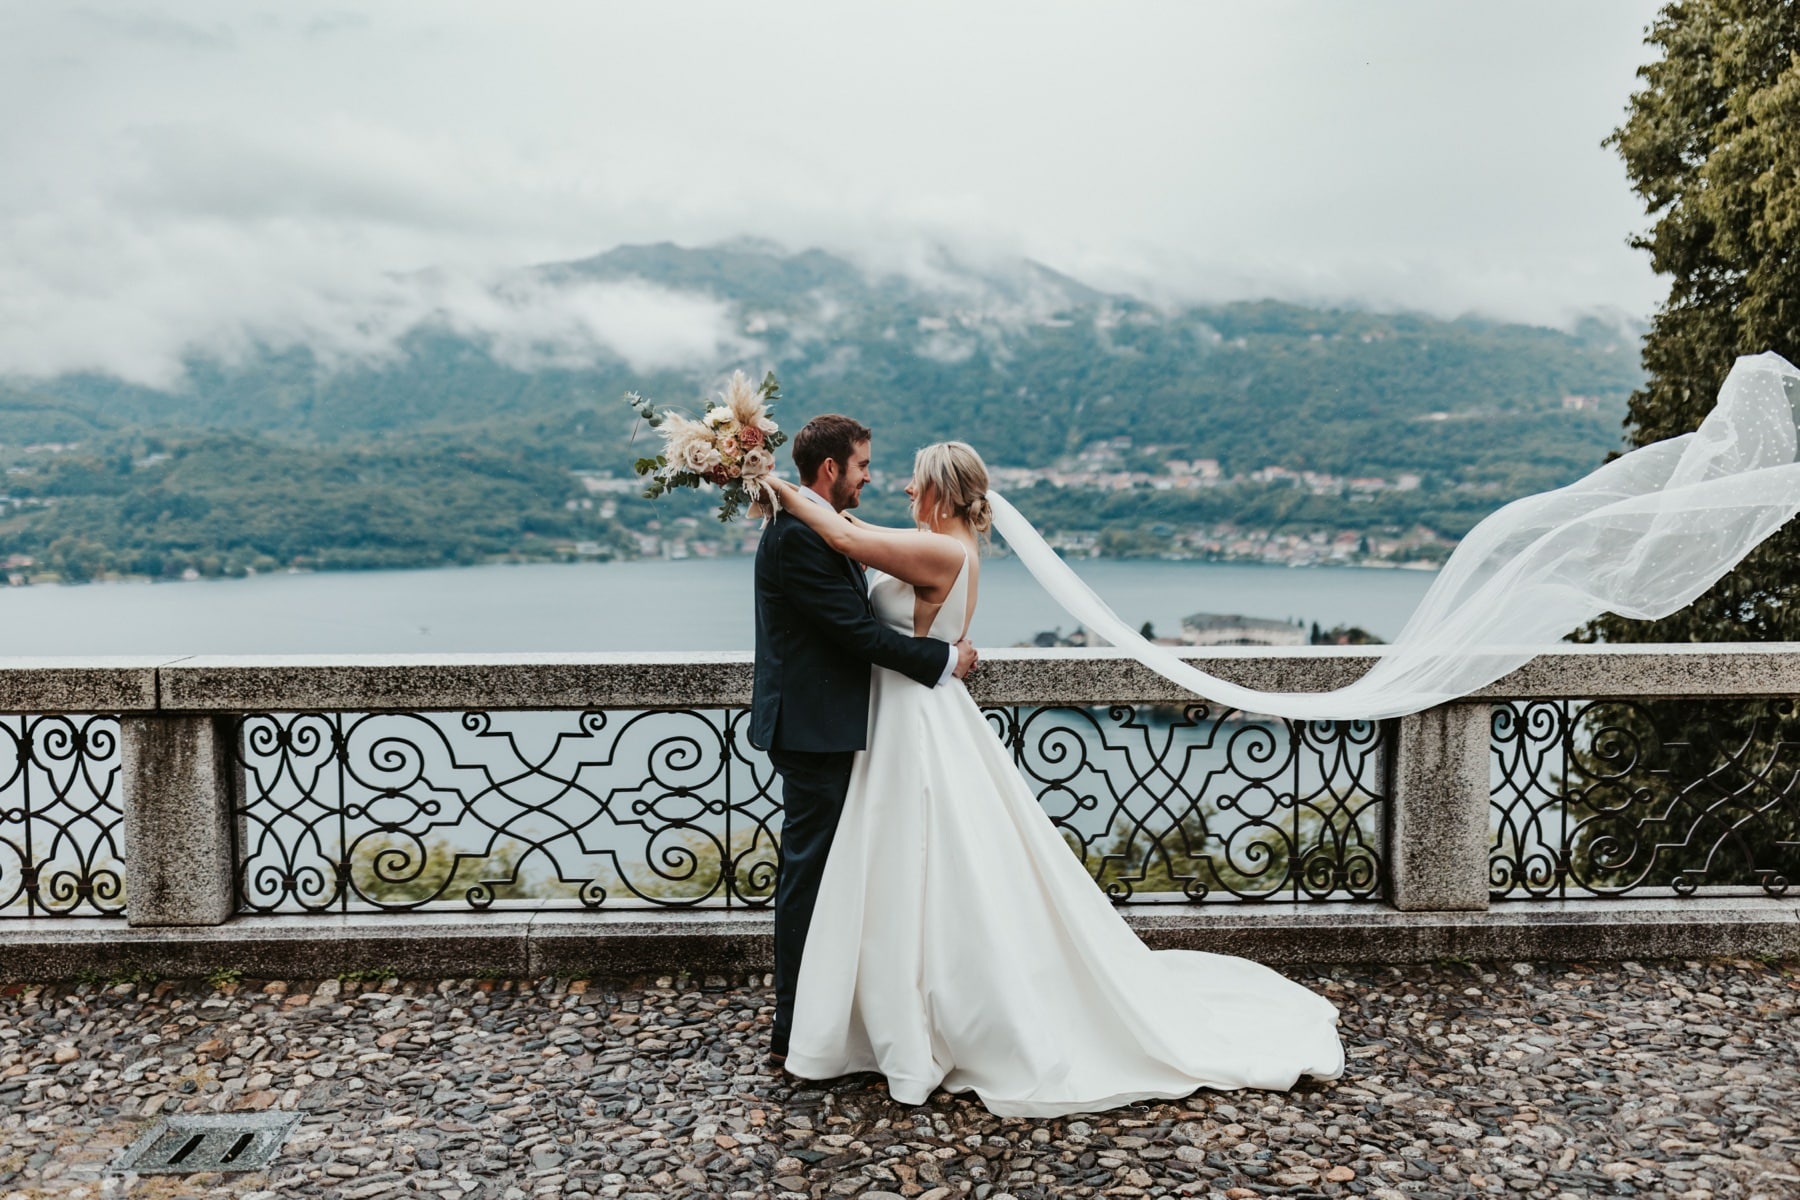 Bespoke destination wedding on the Lake Maggiore in Italy